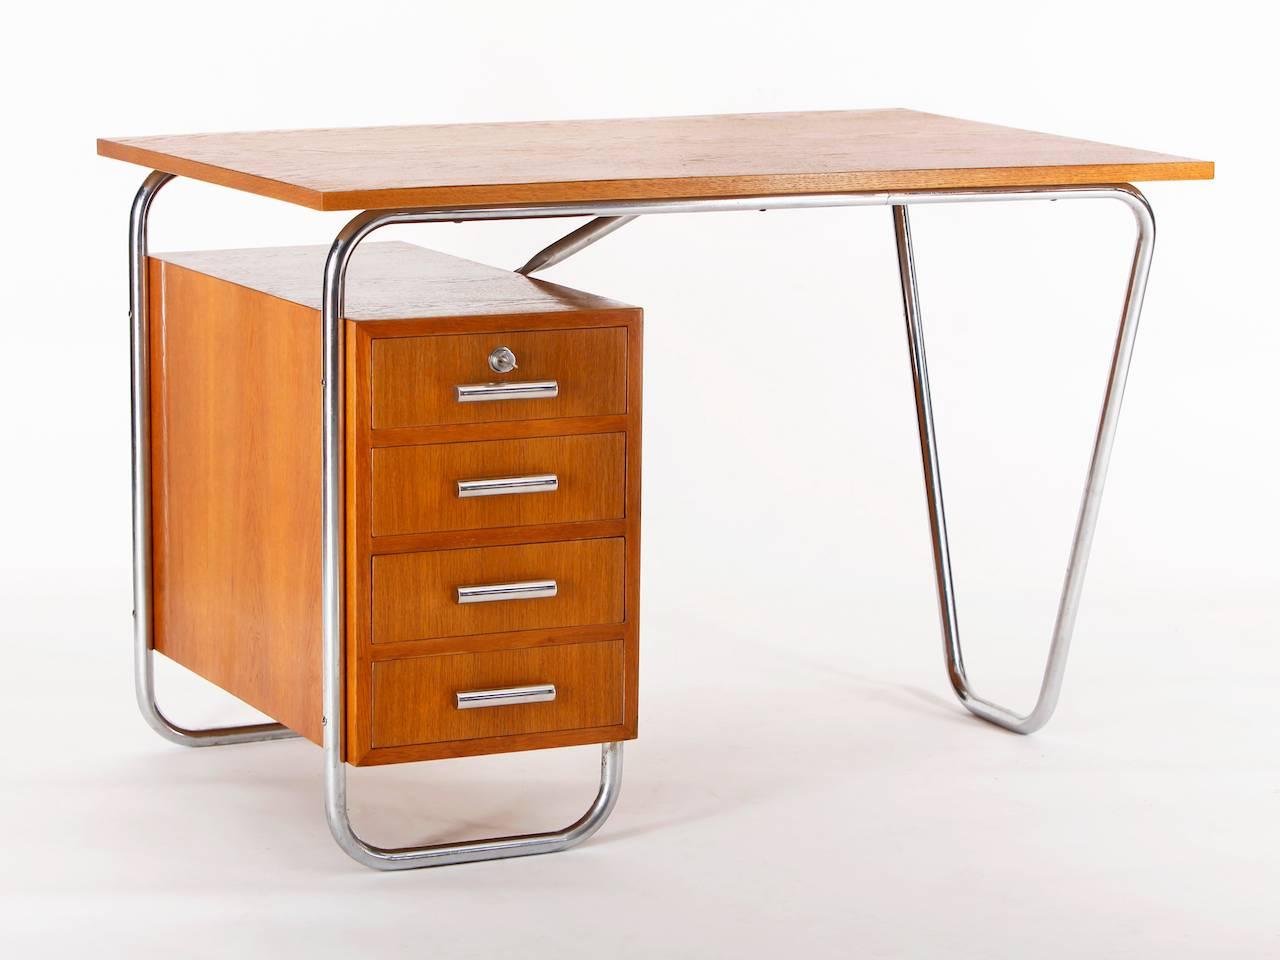 This functionalist desk was made in the 1930s in the former Czech Republic.
 It features a chromed tubular steel frame and a wooden top and drawers. The wooden parts have been restored, the tubular steel is in original condition.